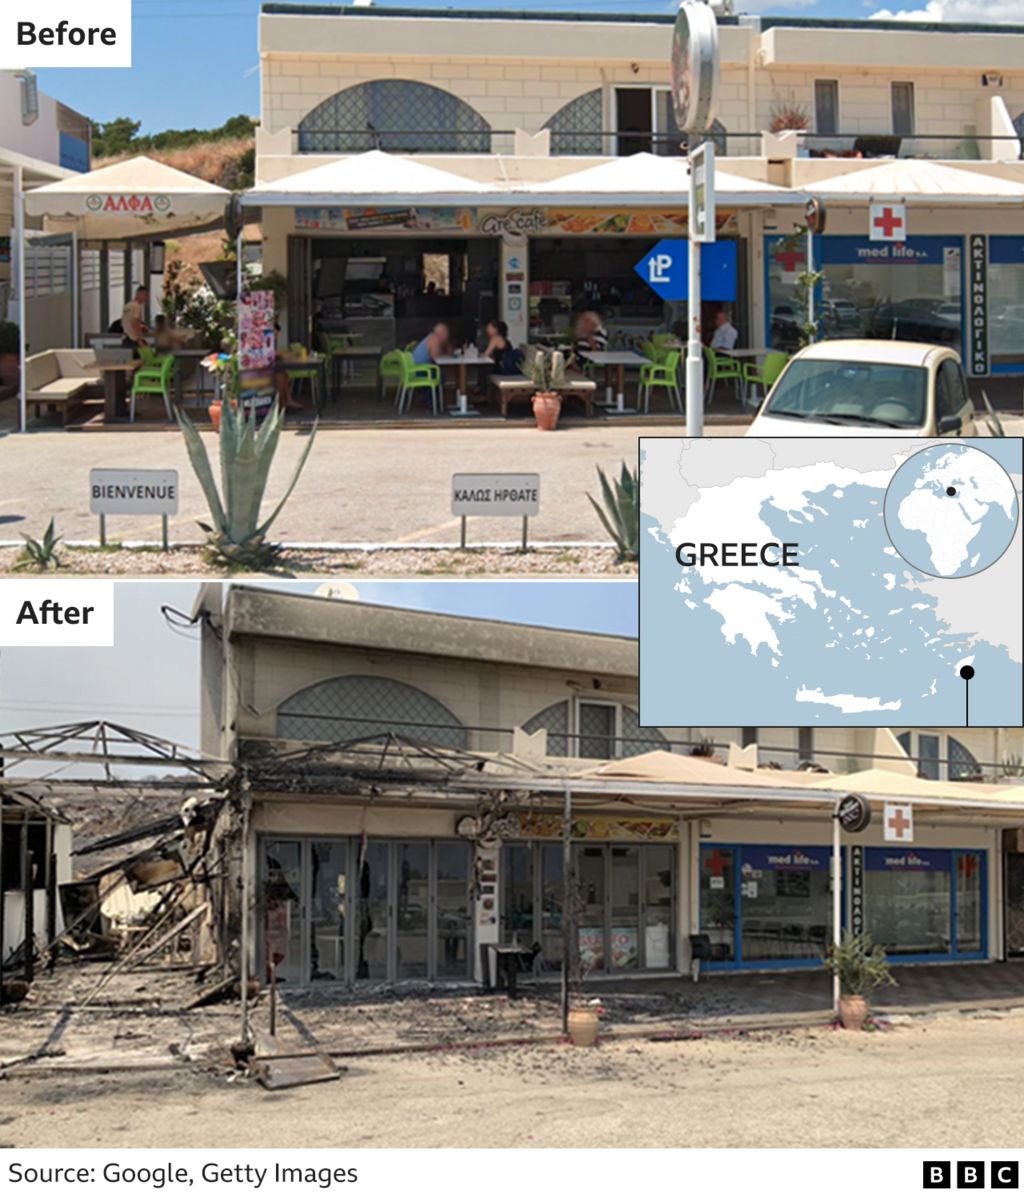 Before and after image showing a burnt down cafe in Kiotari